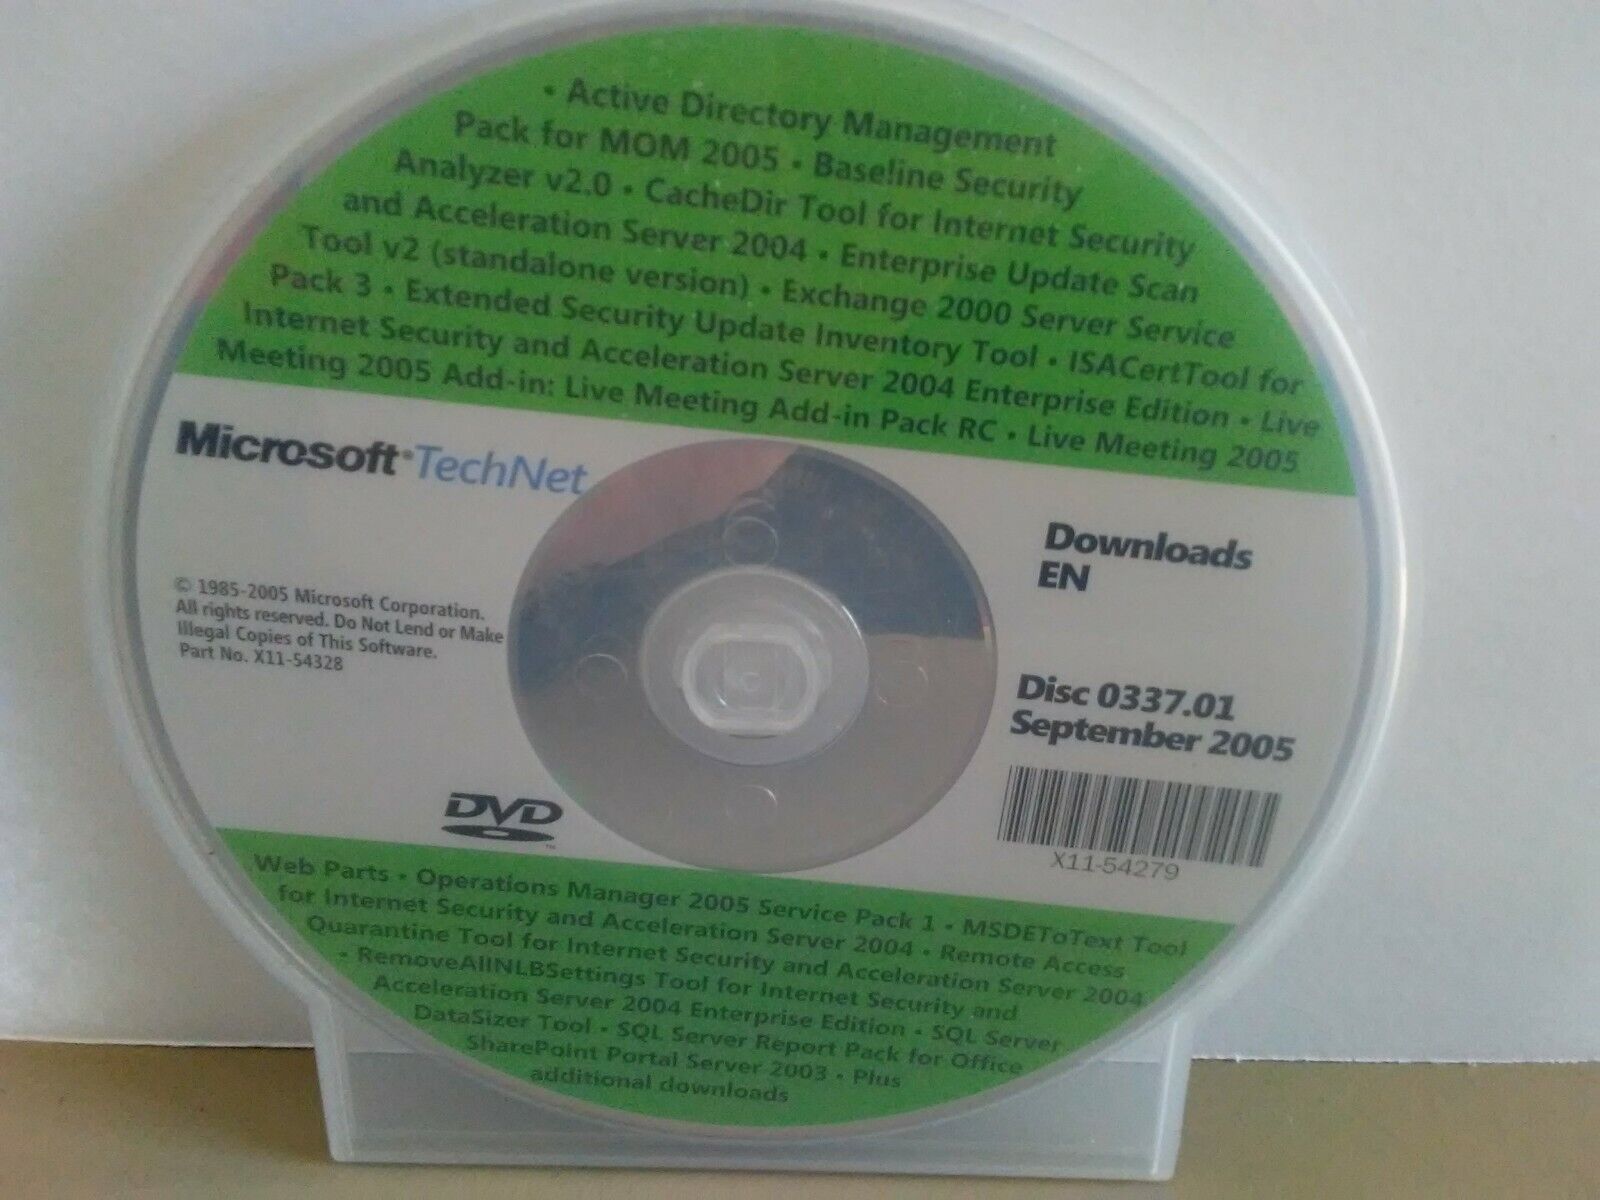 ITHistory (2005/09) IBM PC Software: MICROSOFT TechNet Downloads 0337.01 CD